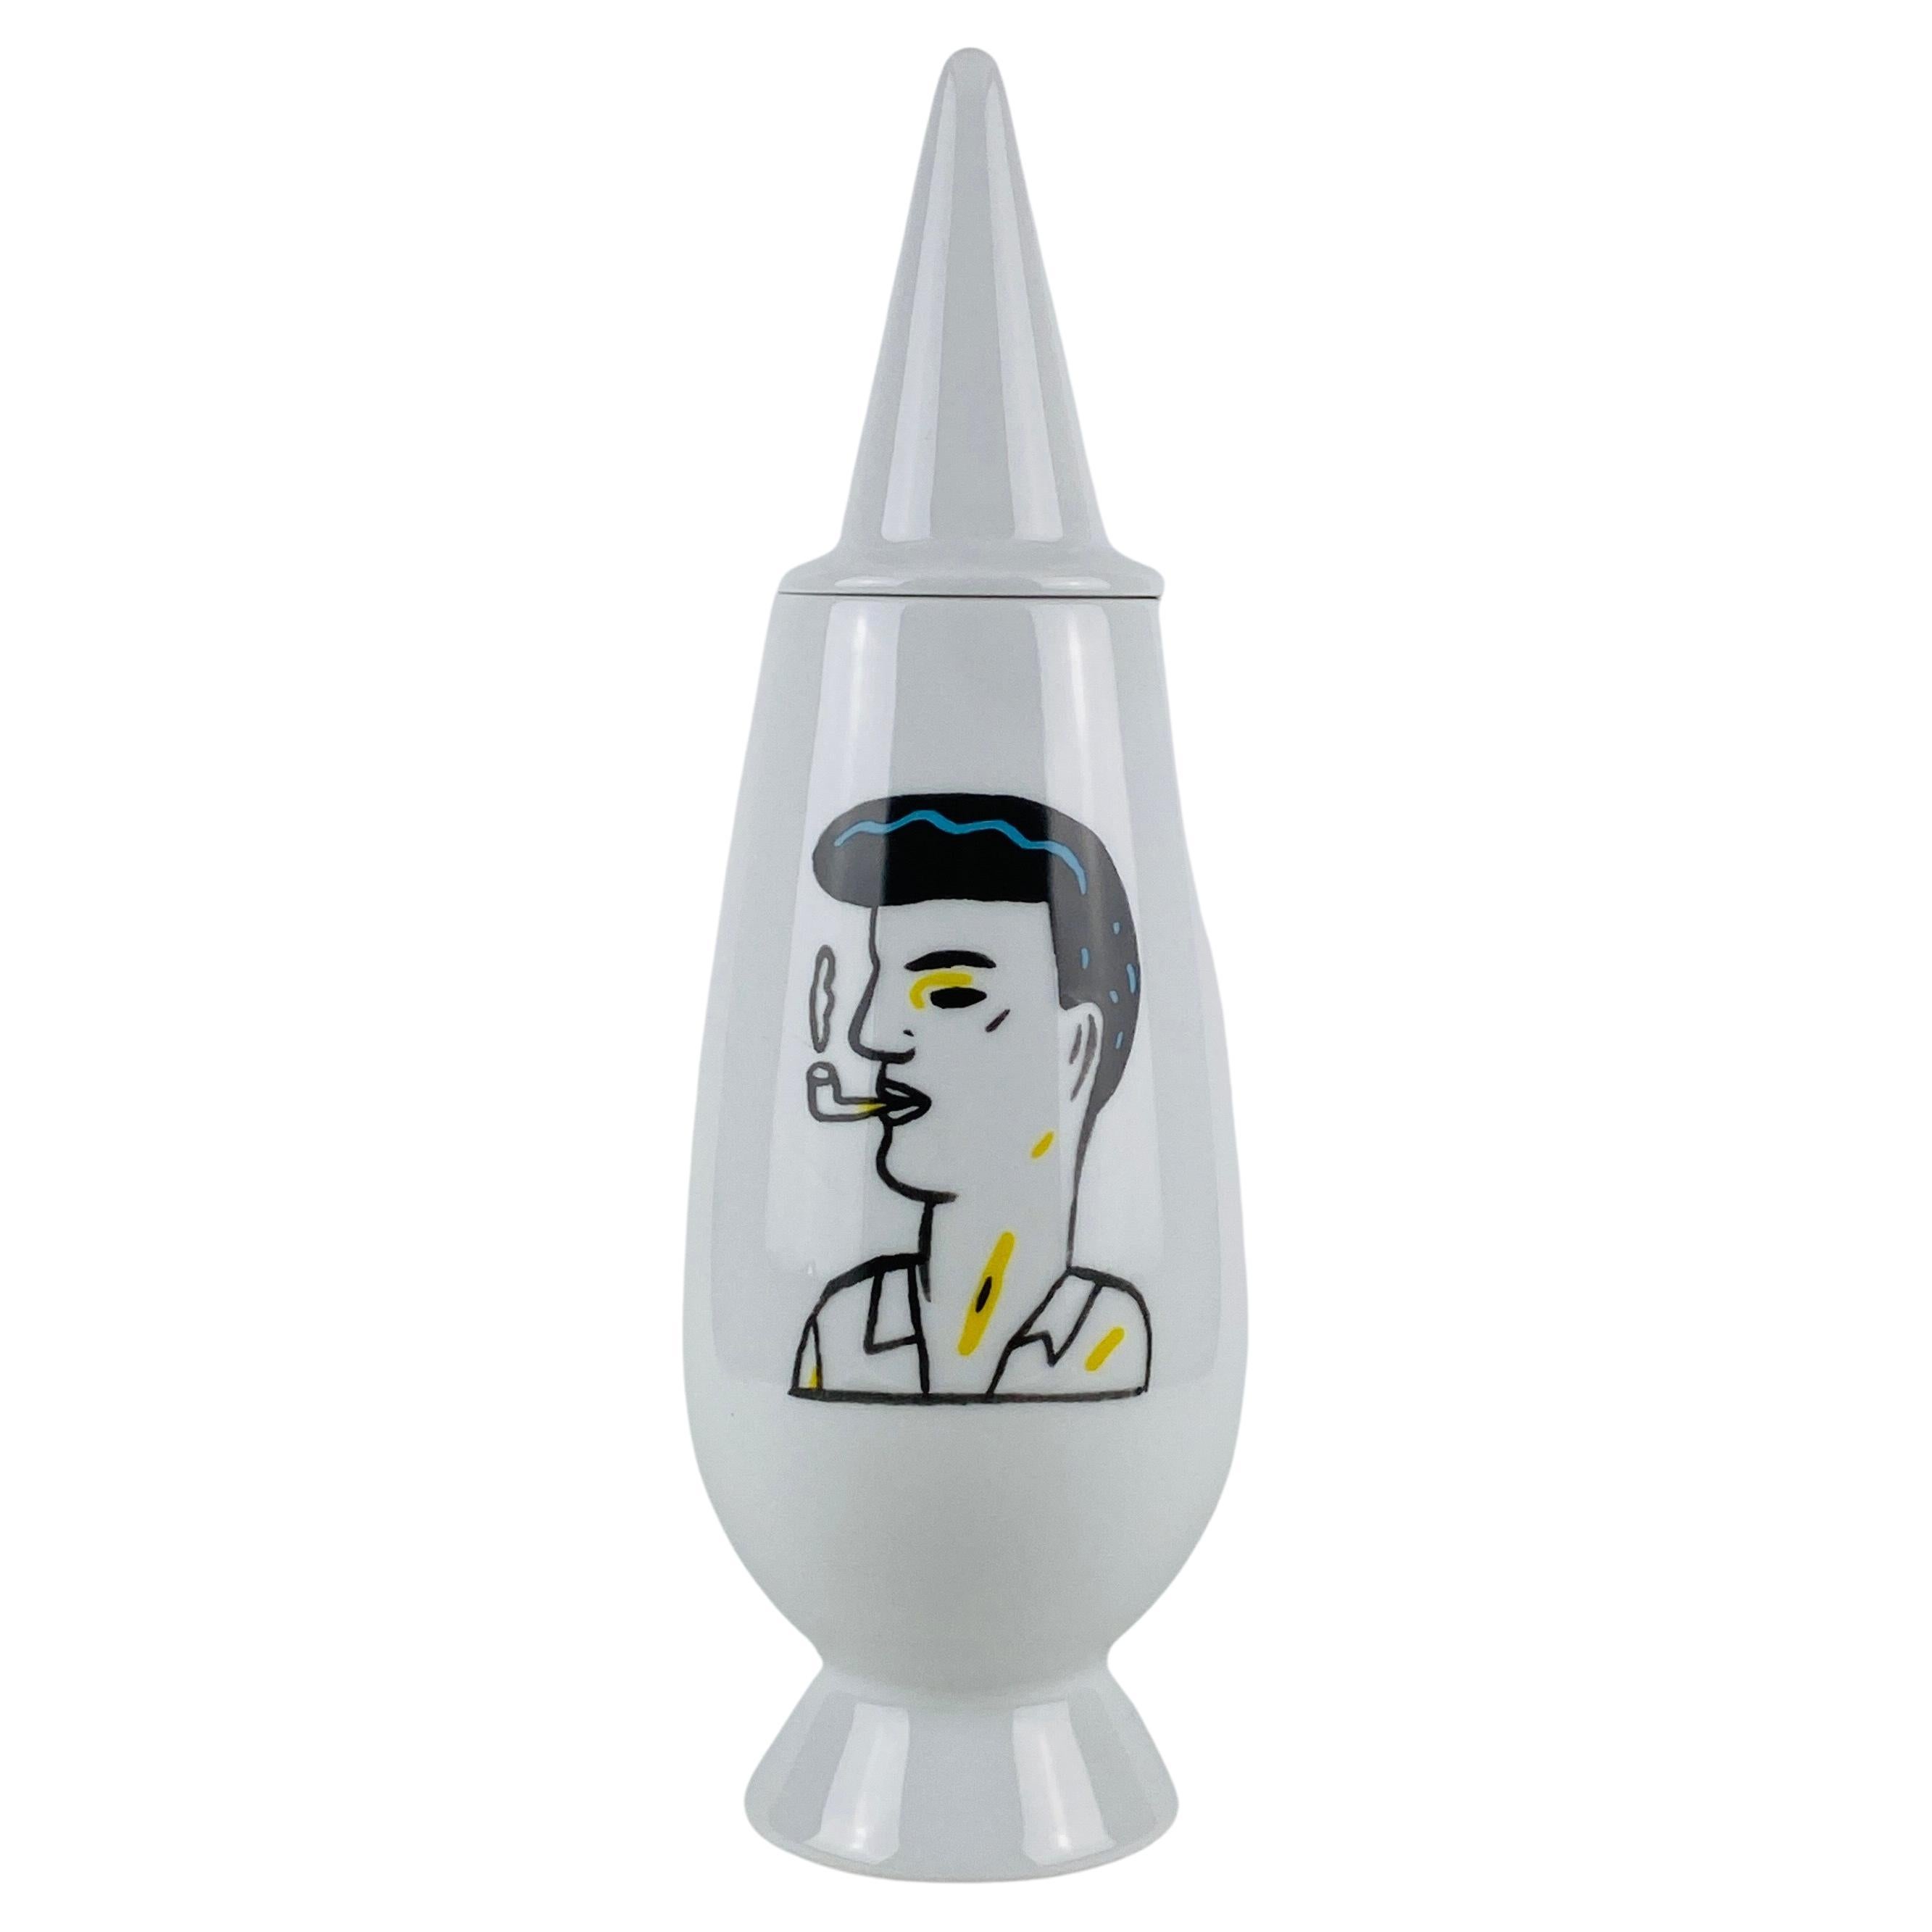 Alessi Tendentse Vase by Guillermo Tejeda for A. Mendini 100% Make-Up Series N83